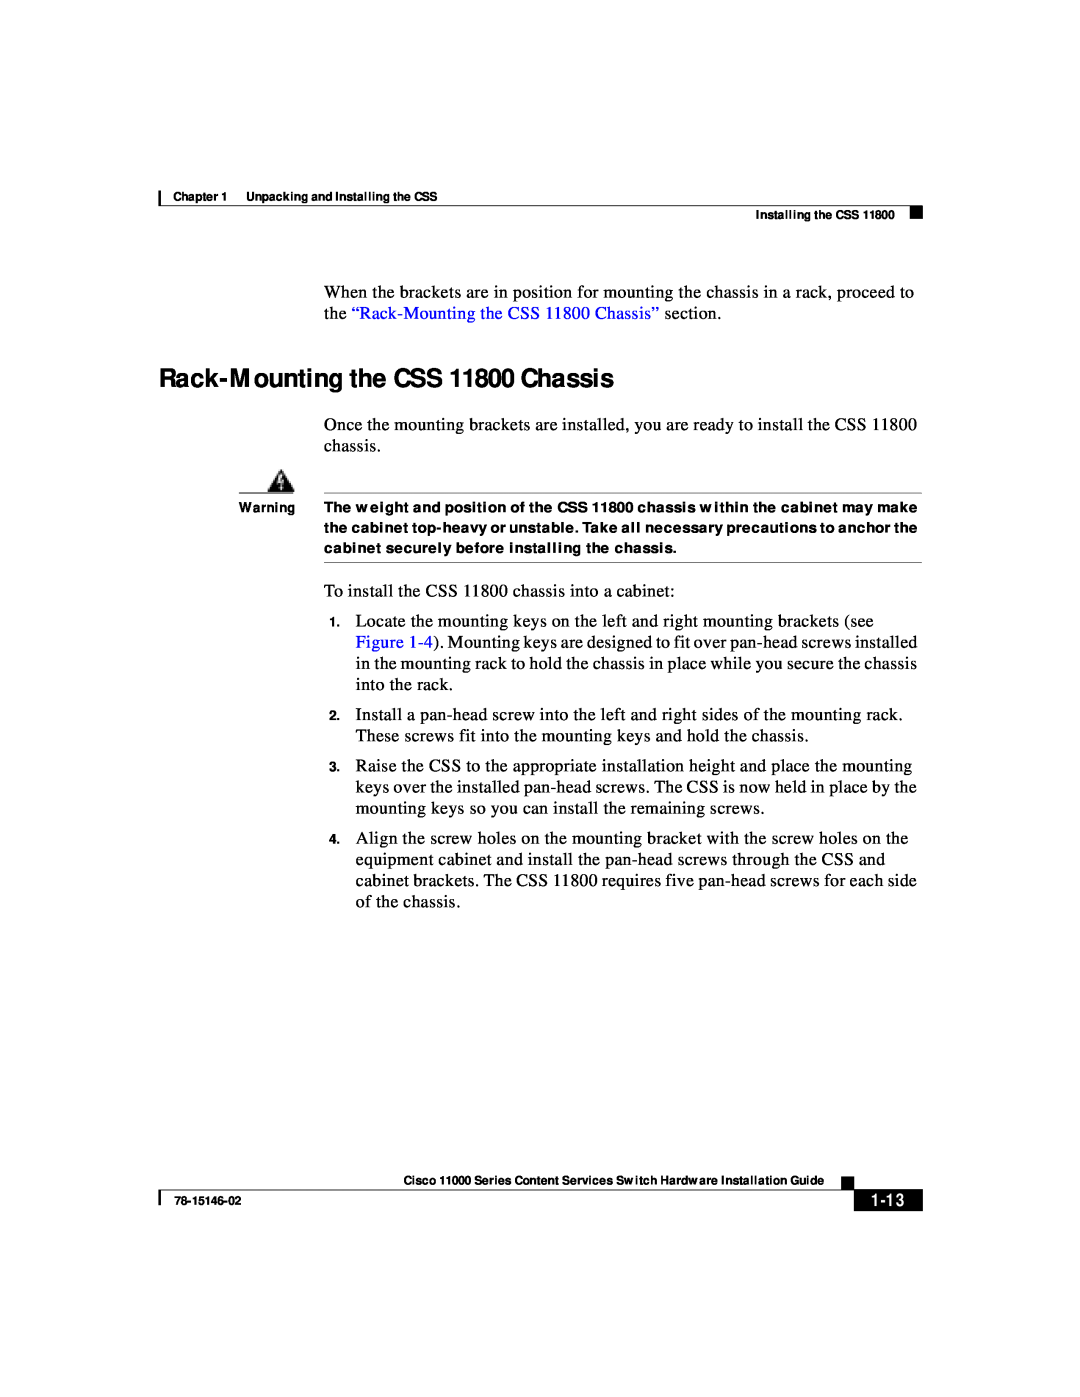 Cisco Systems 11000 Series manual Rack-Mounting the CSS 11800 Chassis, 1-13 